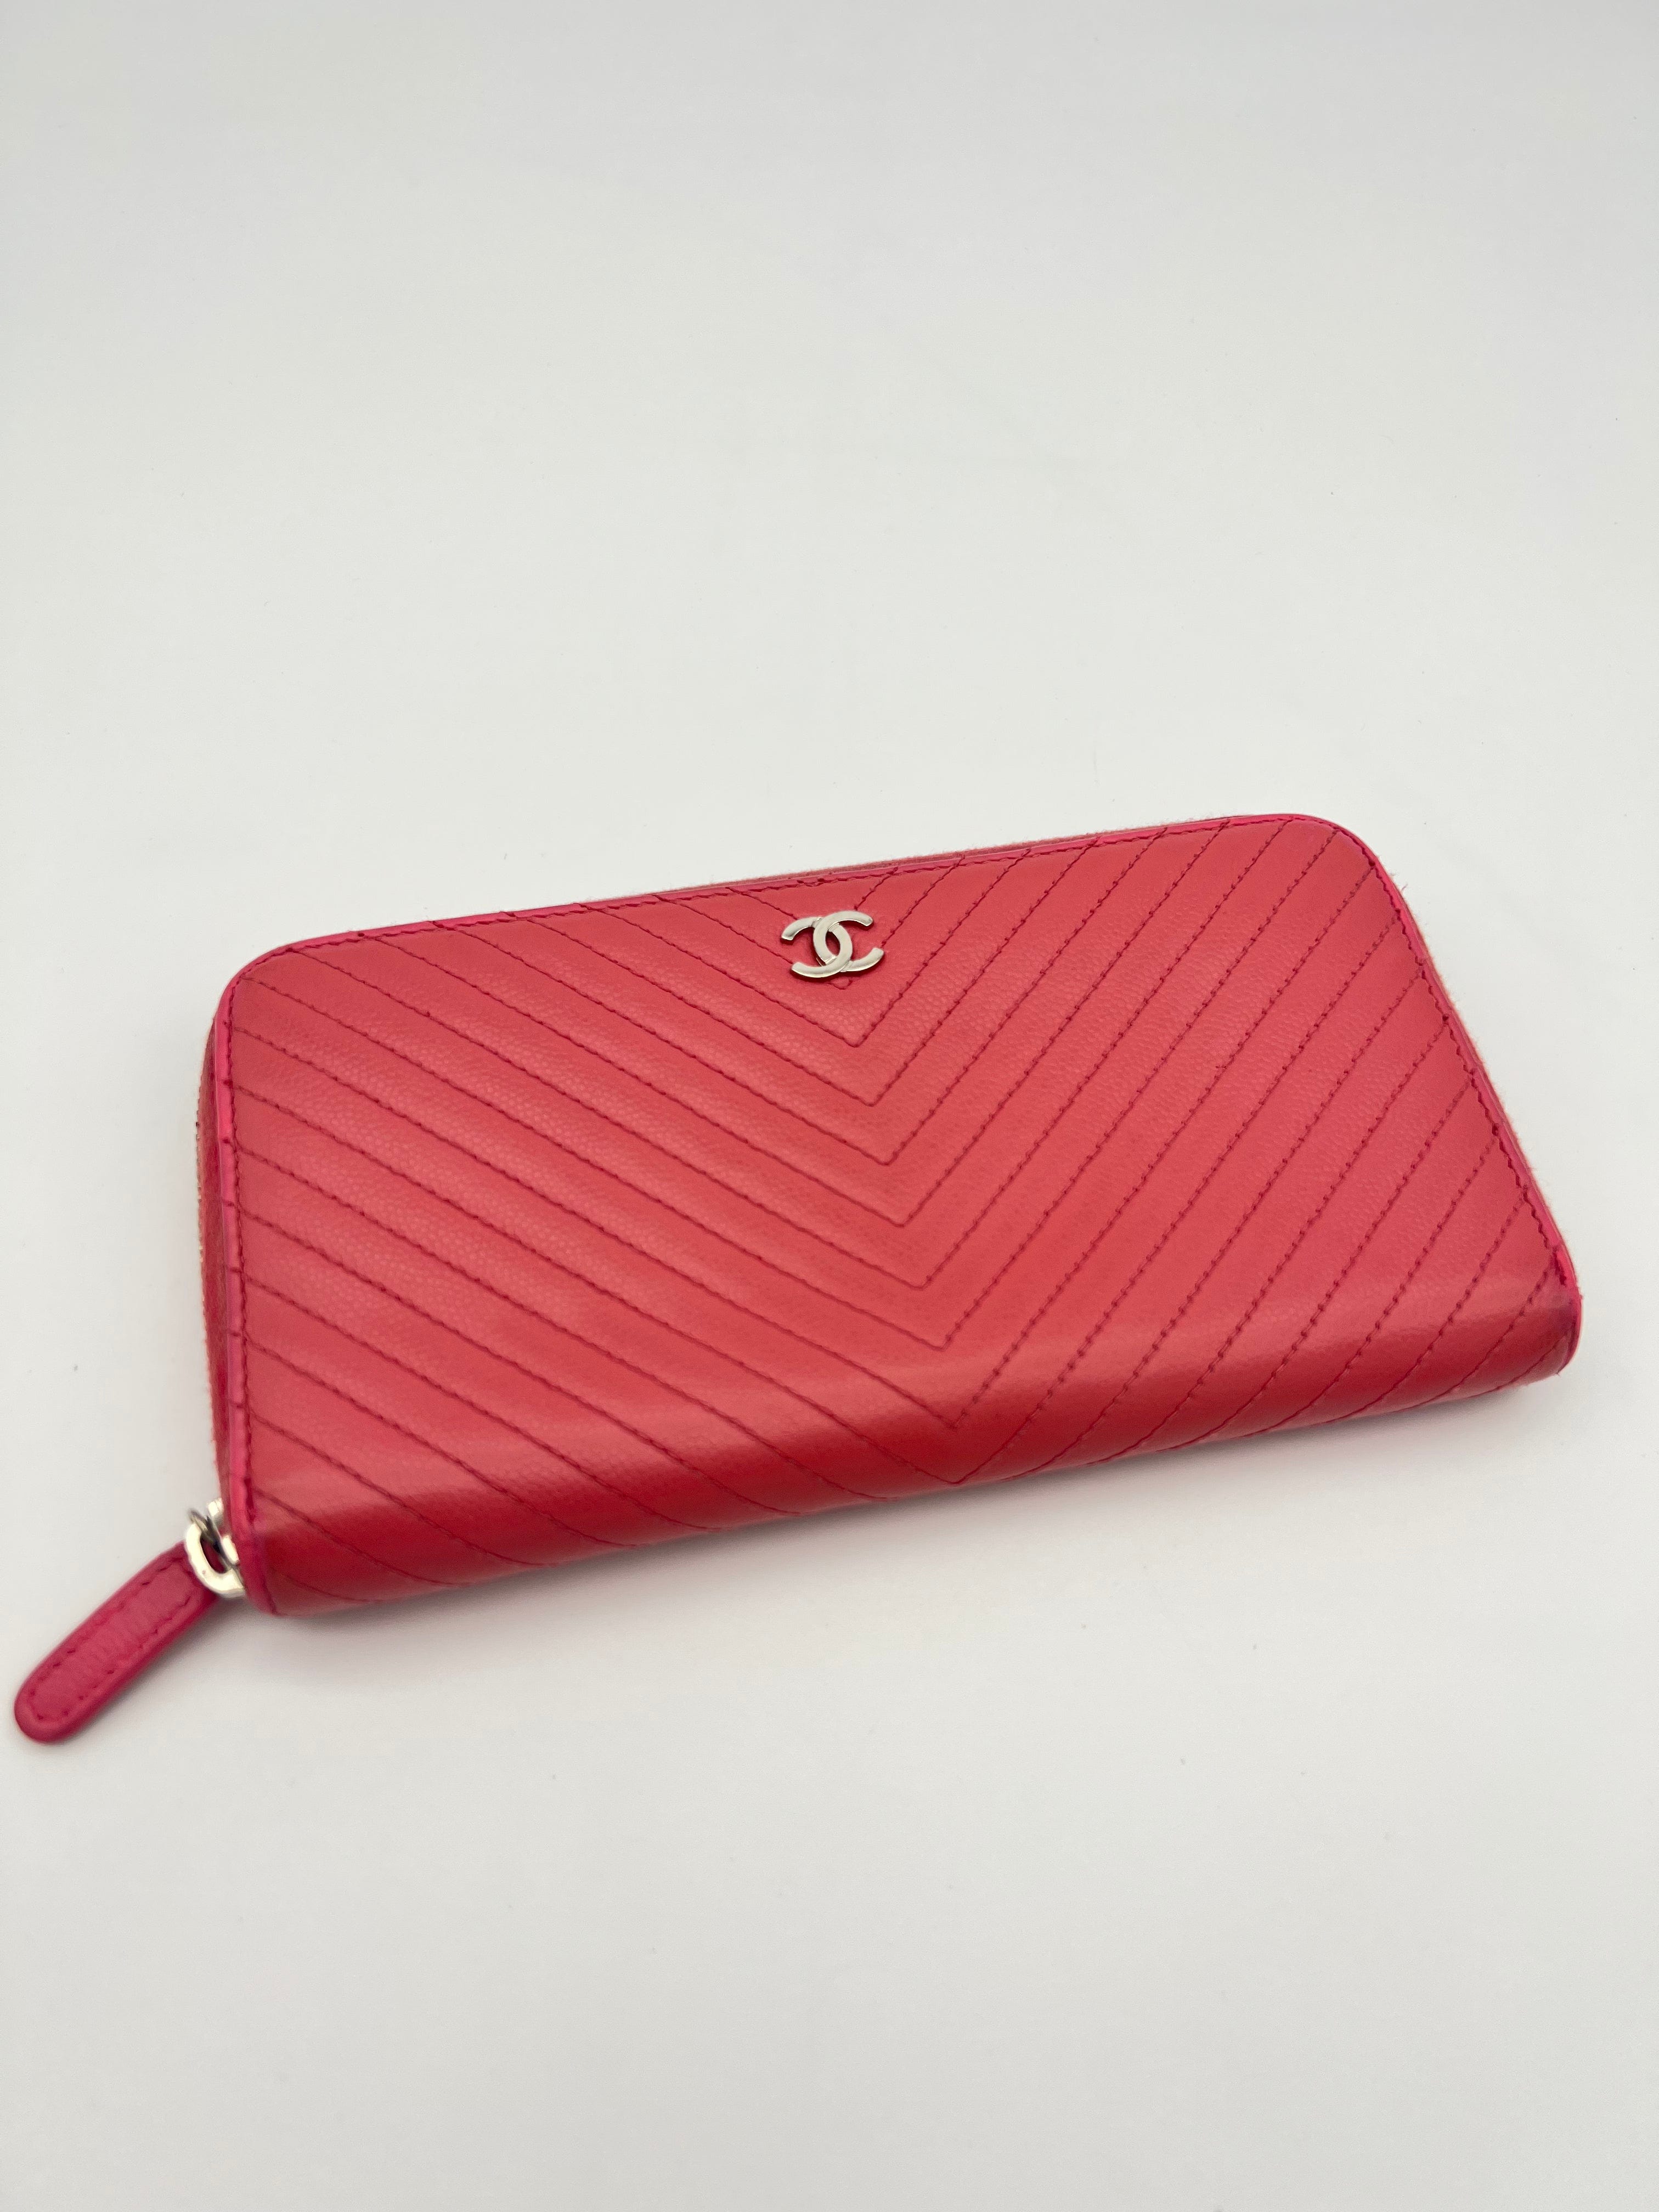 Chanel Pink Chanel Wallet UIC1105